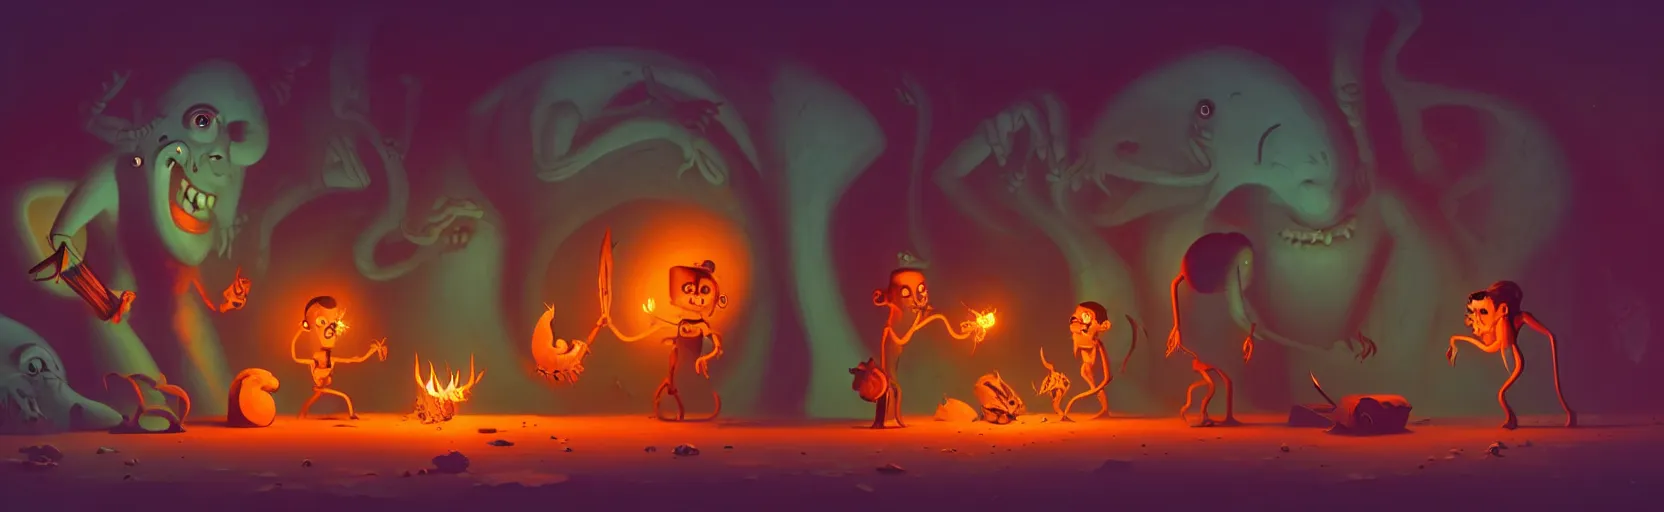 Image similar to uncanny whimsical savage mutants from the depths of a vast wasteland in the collective unconscious, dramatic lighting from fiery torches, surreal fleischer cartoon characters, shallow dof, surreal painting by ronny khalil and bosch